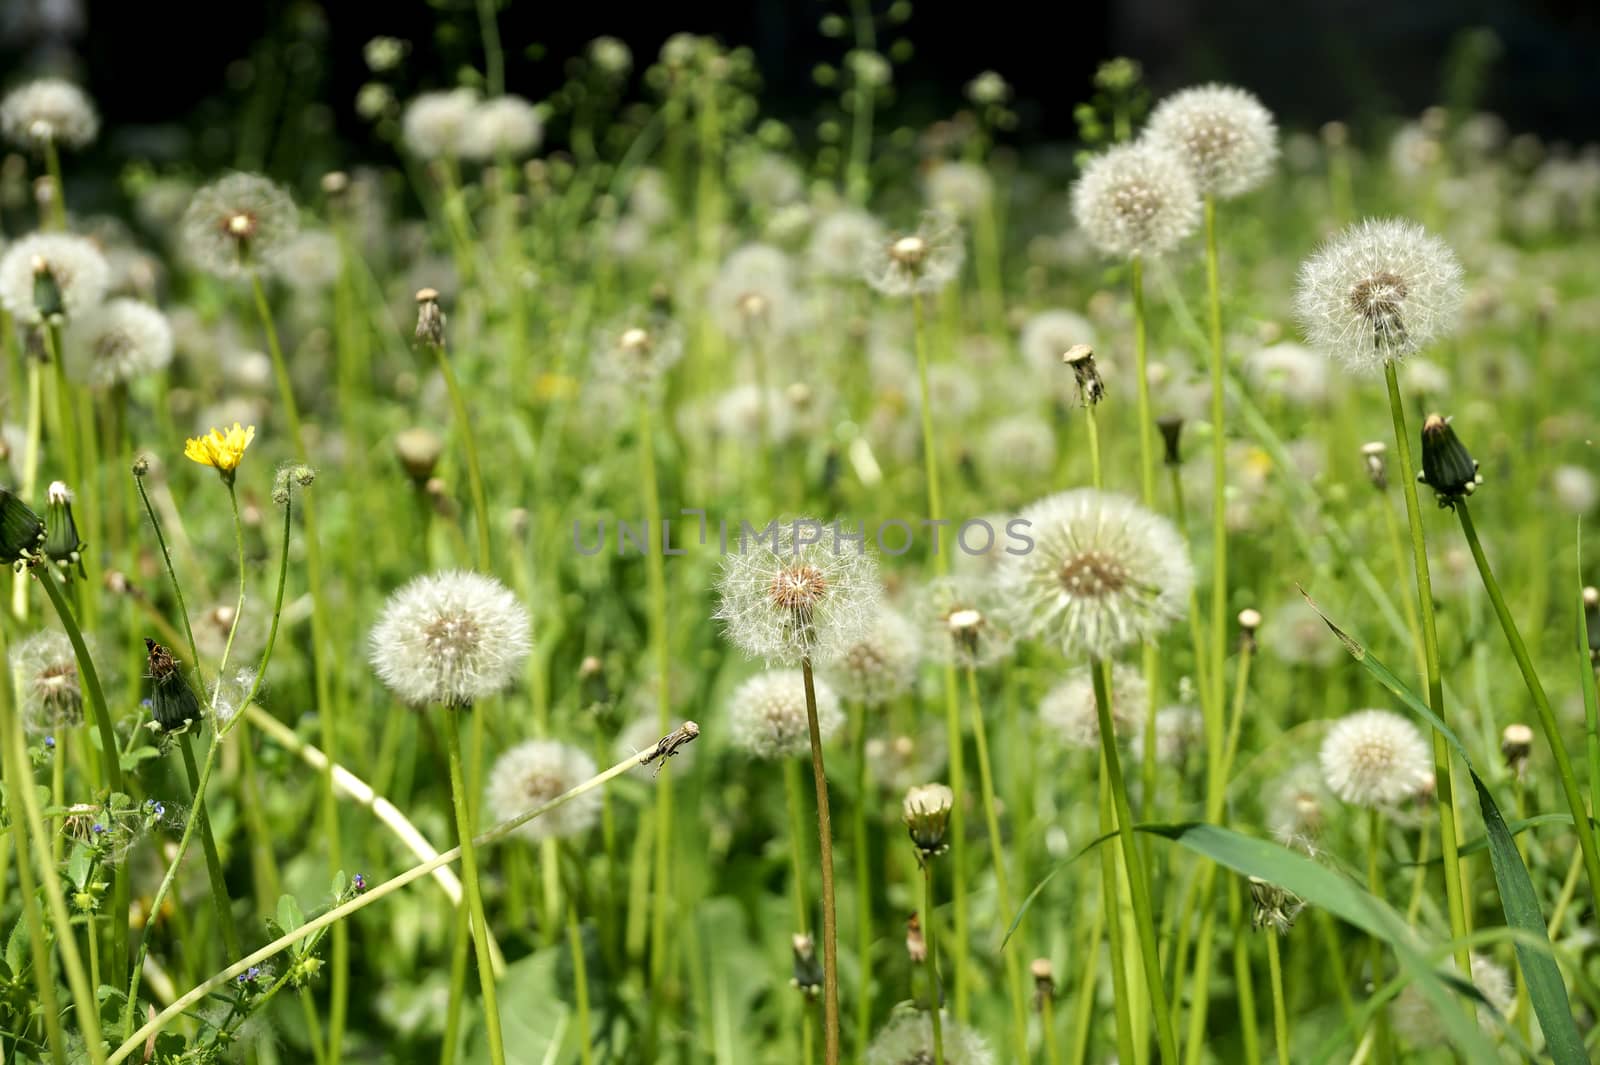 Mature dandelions on a lawn in the city yard in May                               